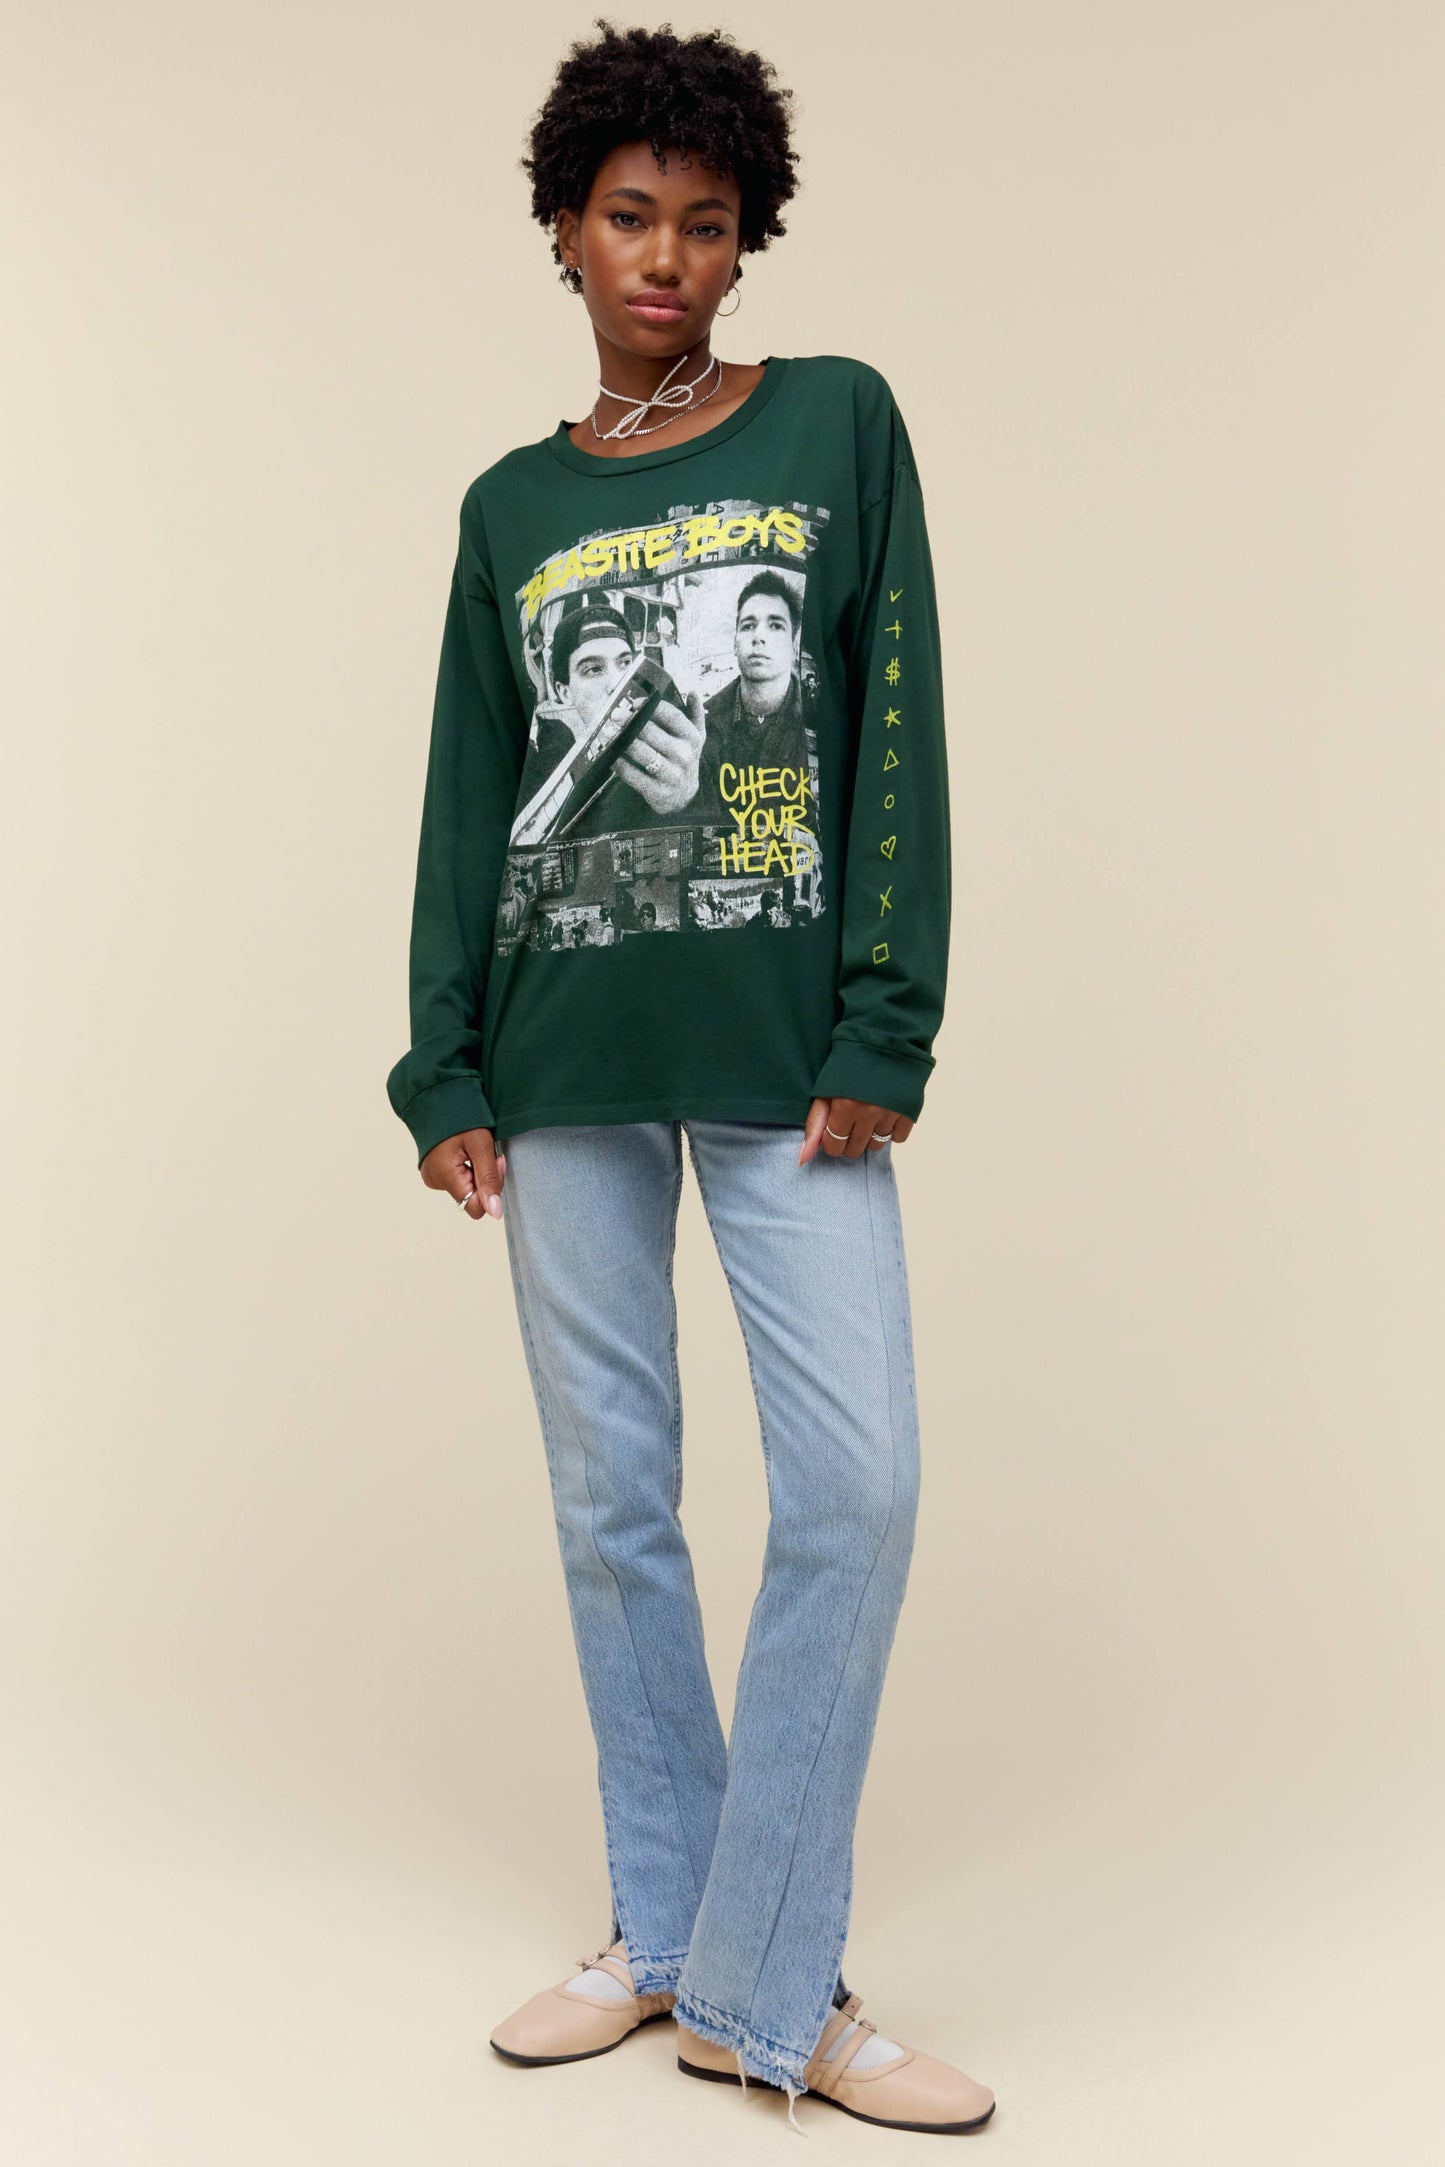 A model featuring a vintage green Beastie Boys long sleeve designed with the album title and a scanned looking collage of multiple photos of the boys and their history, with hand drawn symbols down the left sleeve.